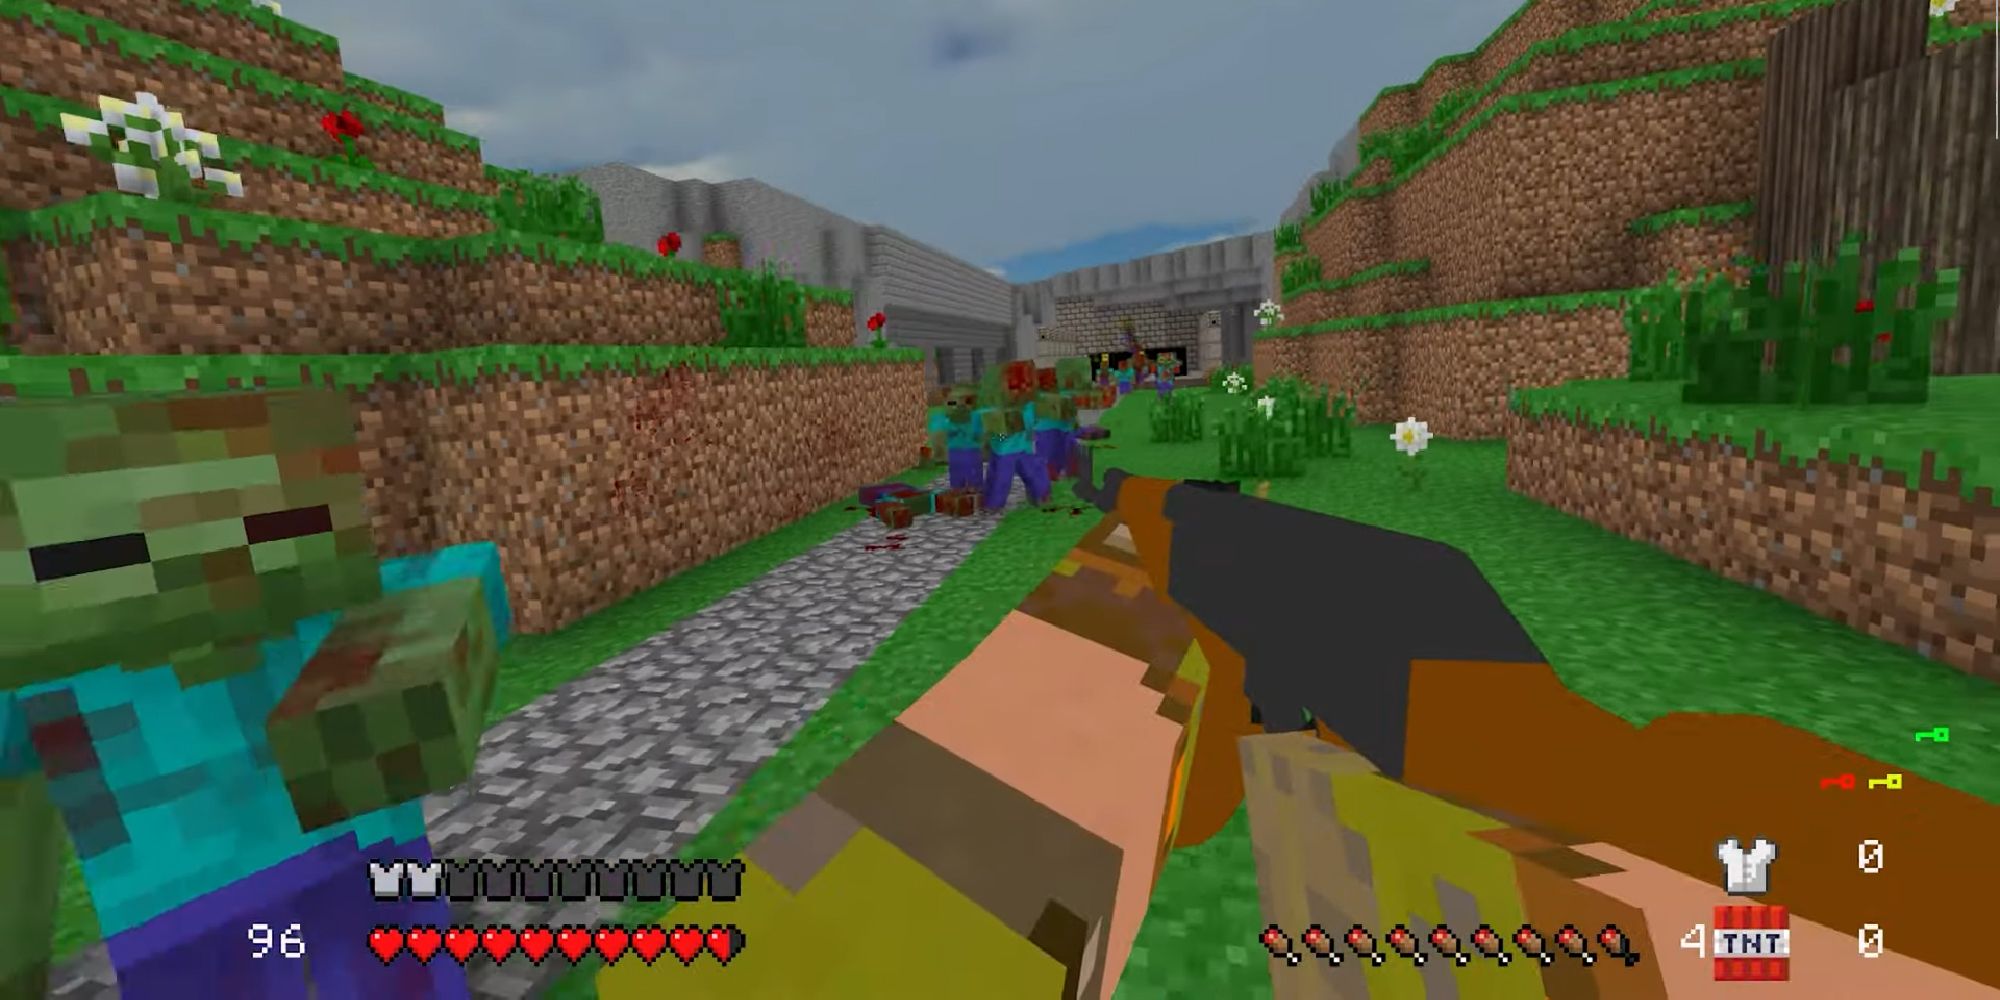 Doom player in Minecraft shooting zombies with an AK-47 in the plains 